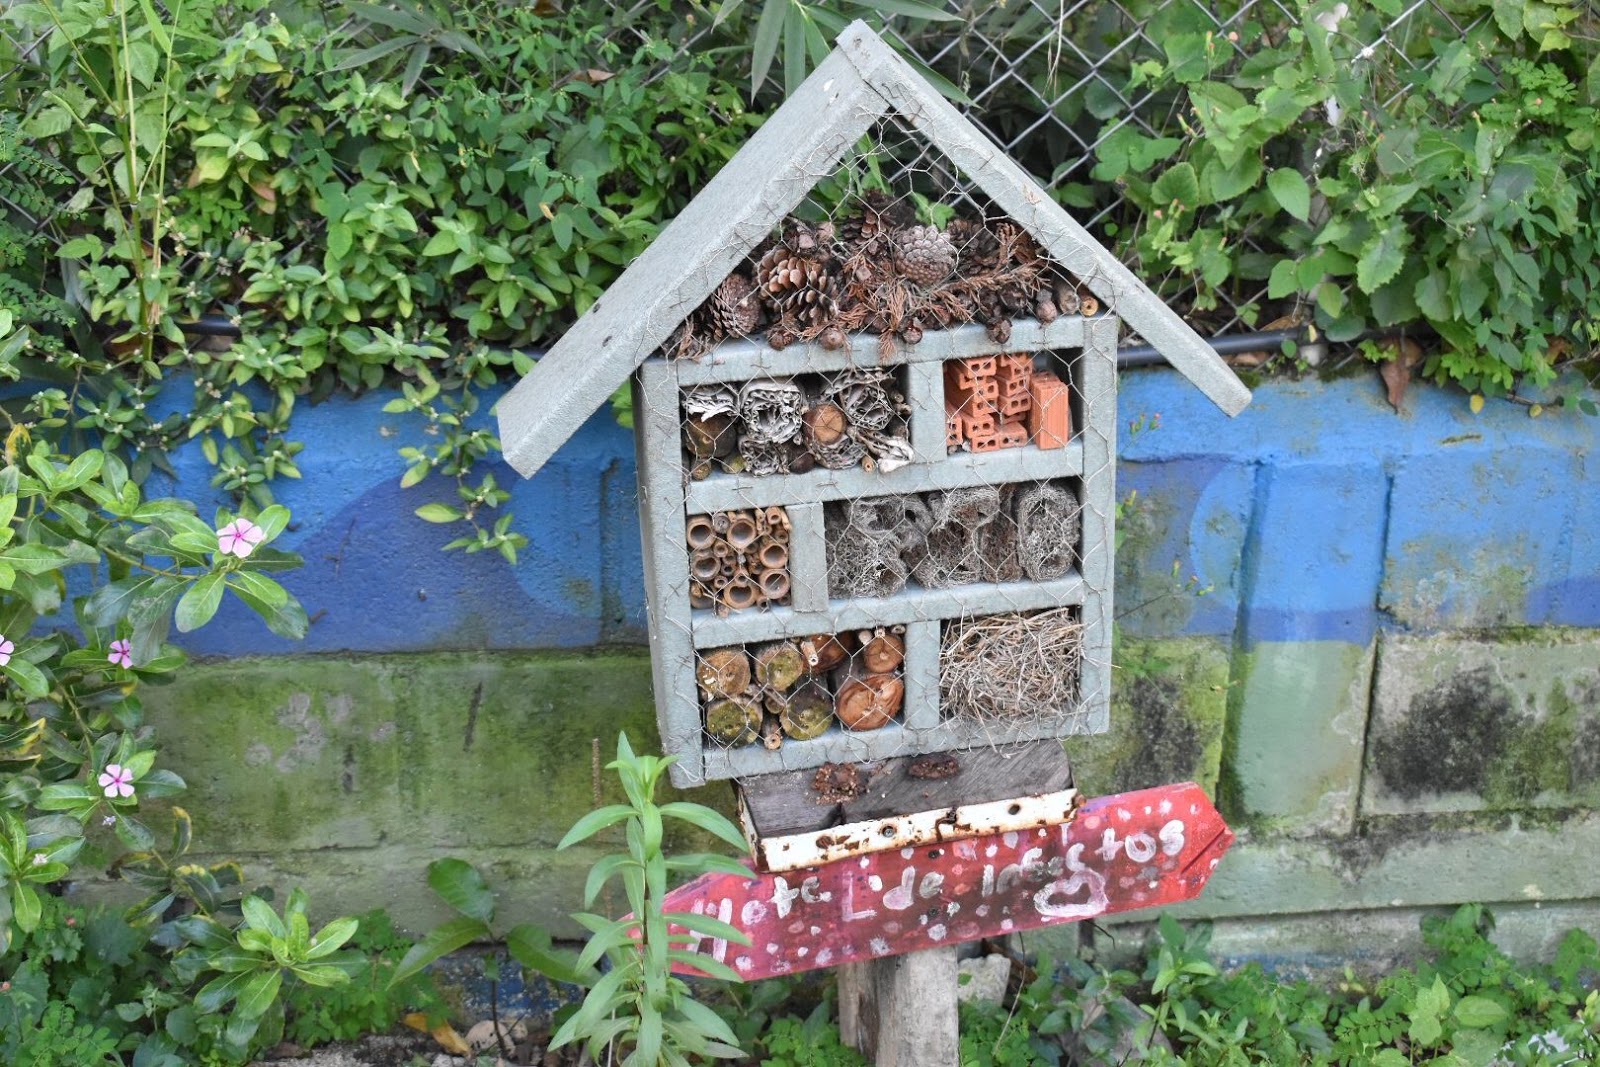 A small house shaped structure with sections that are filled with various materials such as tiny bricks, pinecones and sticks where bees can nest.